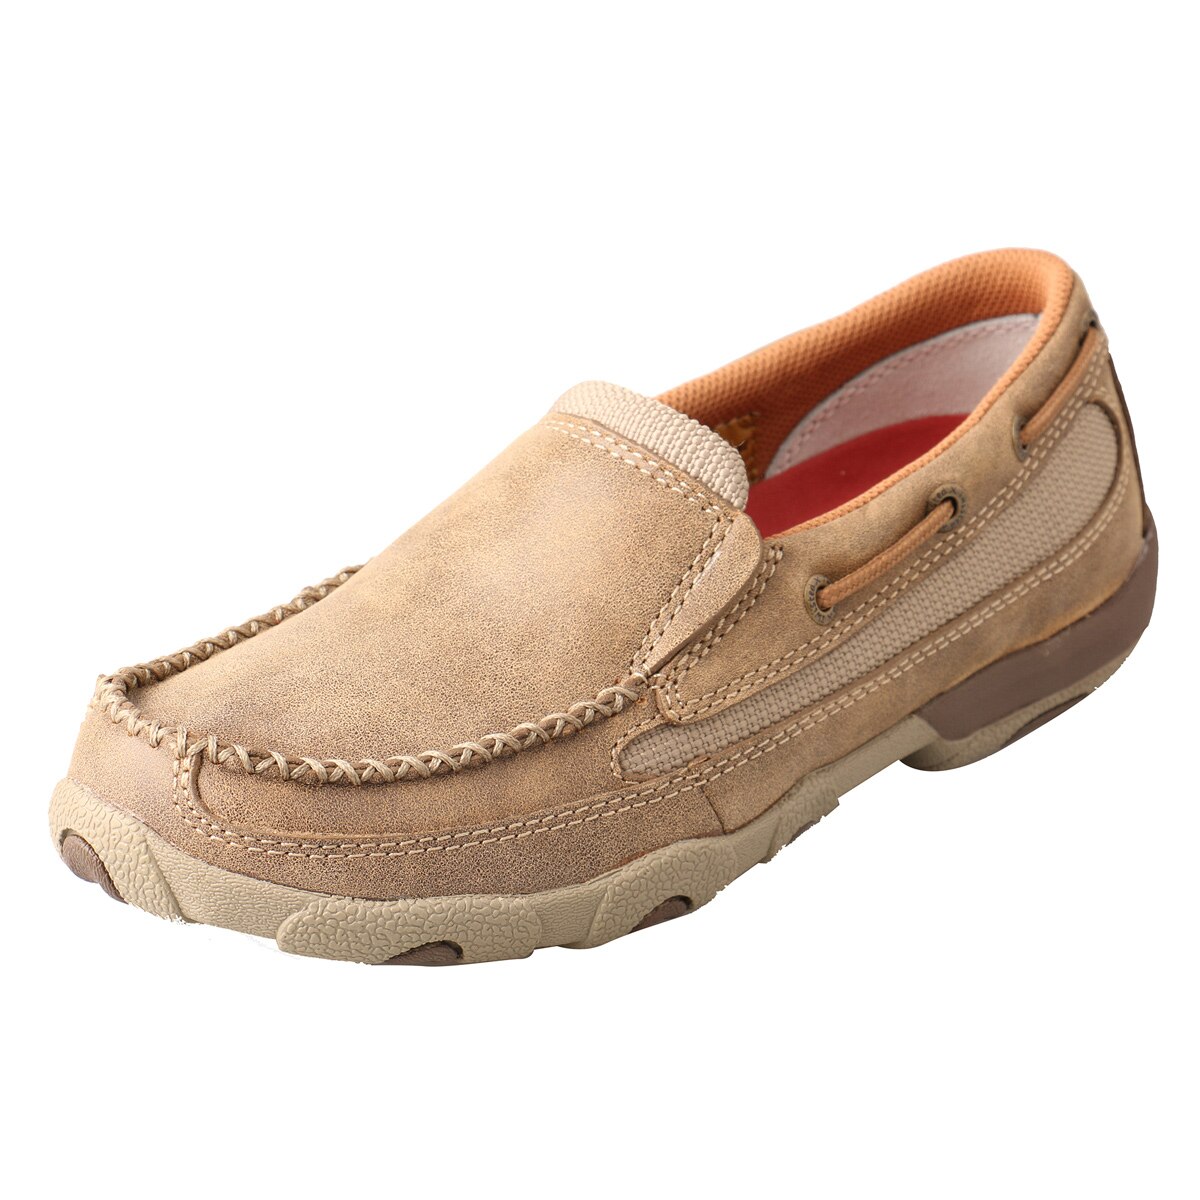 women's twisted x slip on shoes